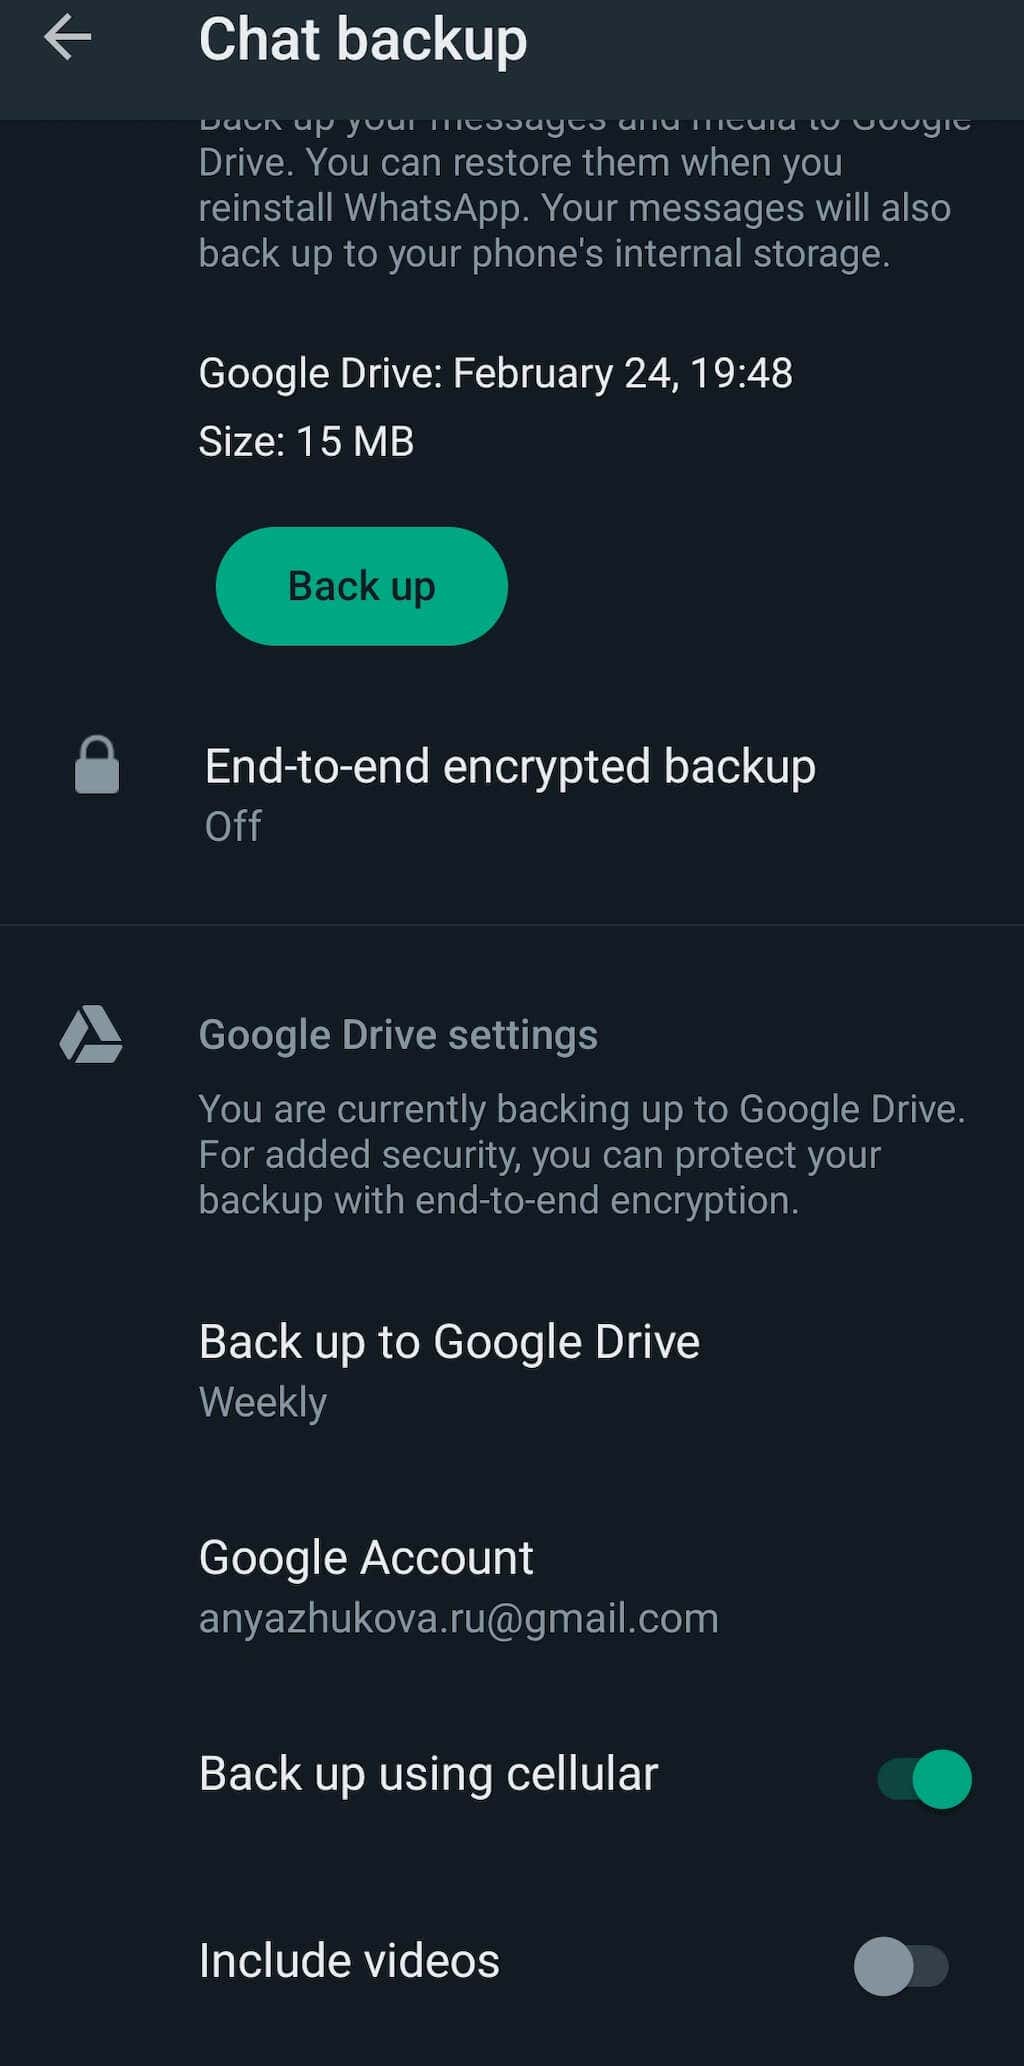 Why Is the WhatsApp Backup Taking Too Long? image 2